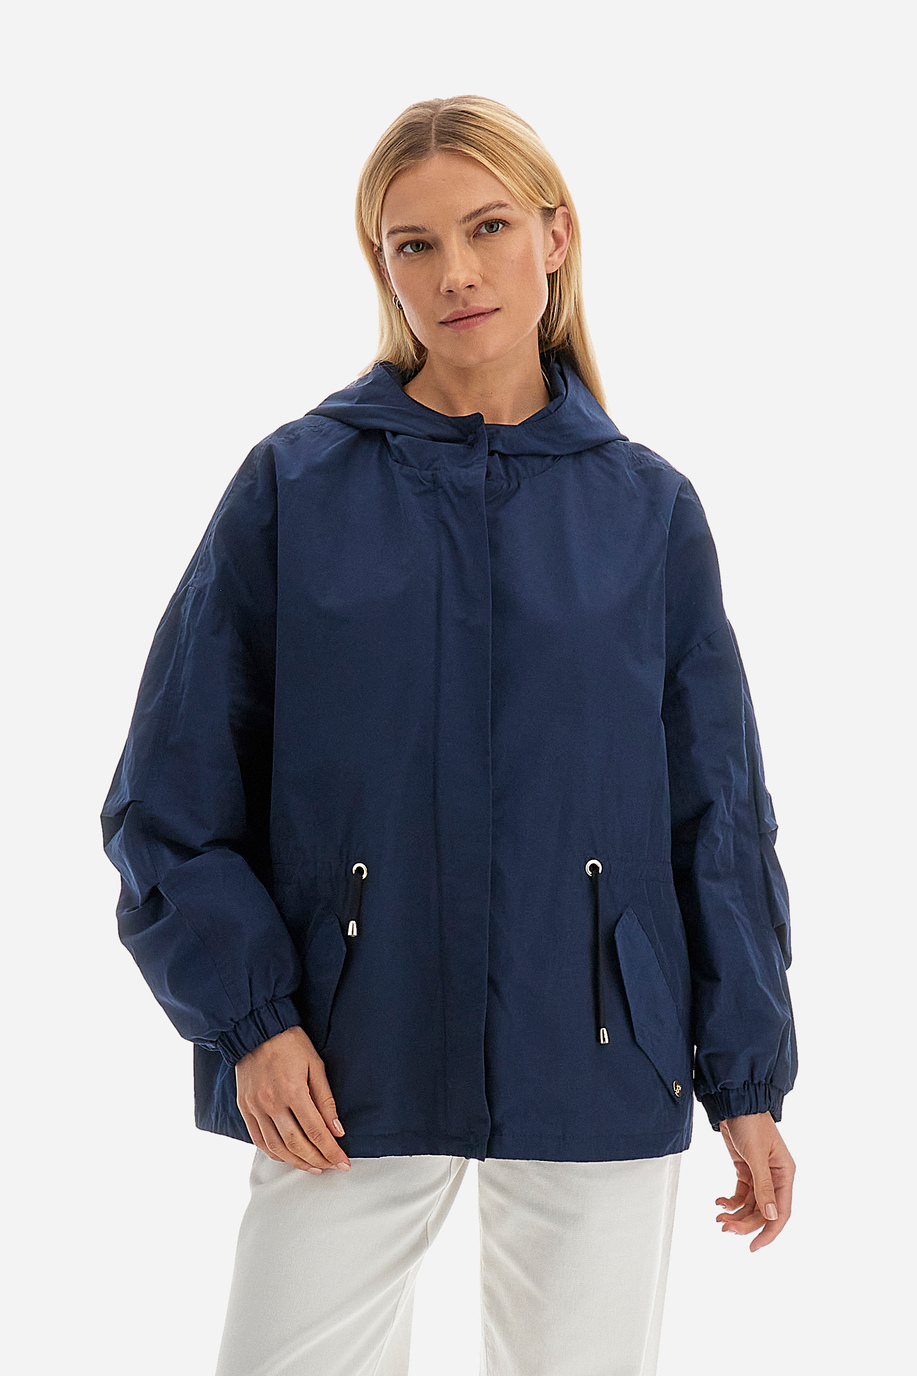 Solid color women's capsule Spring Weekend trench jacket with pockets - Vandani - Apparel | La Martina - Official Online Shop